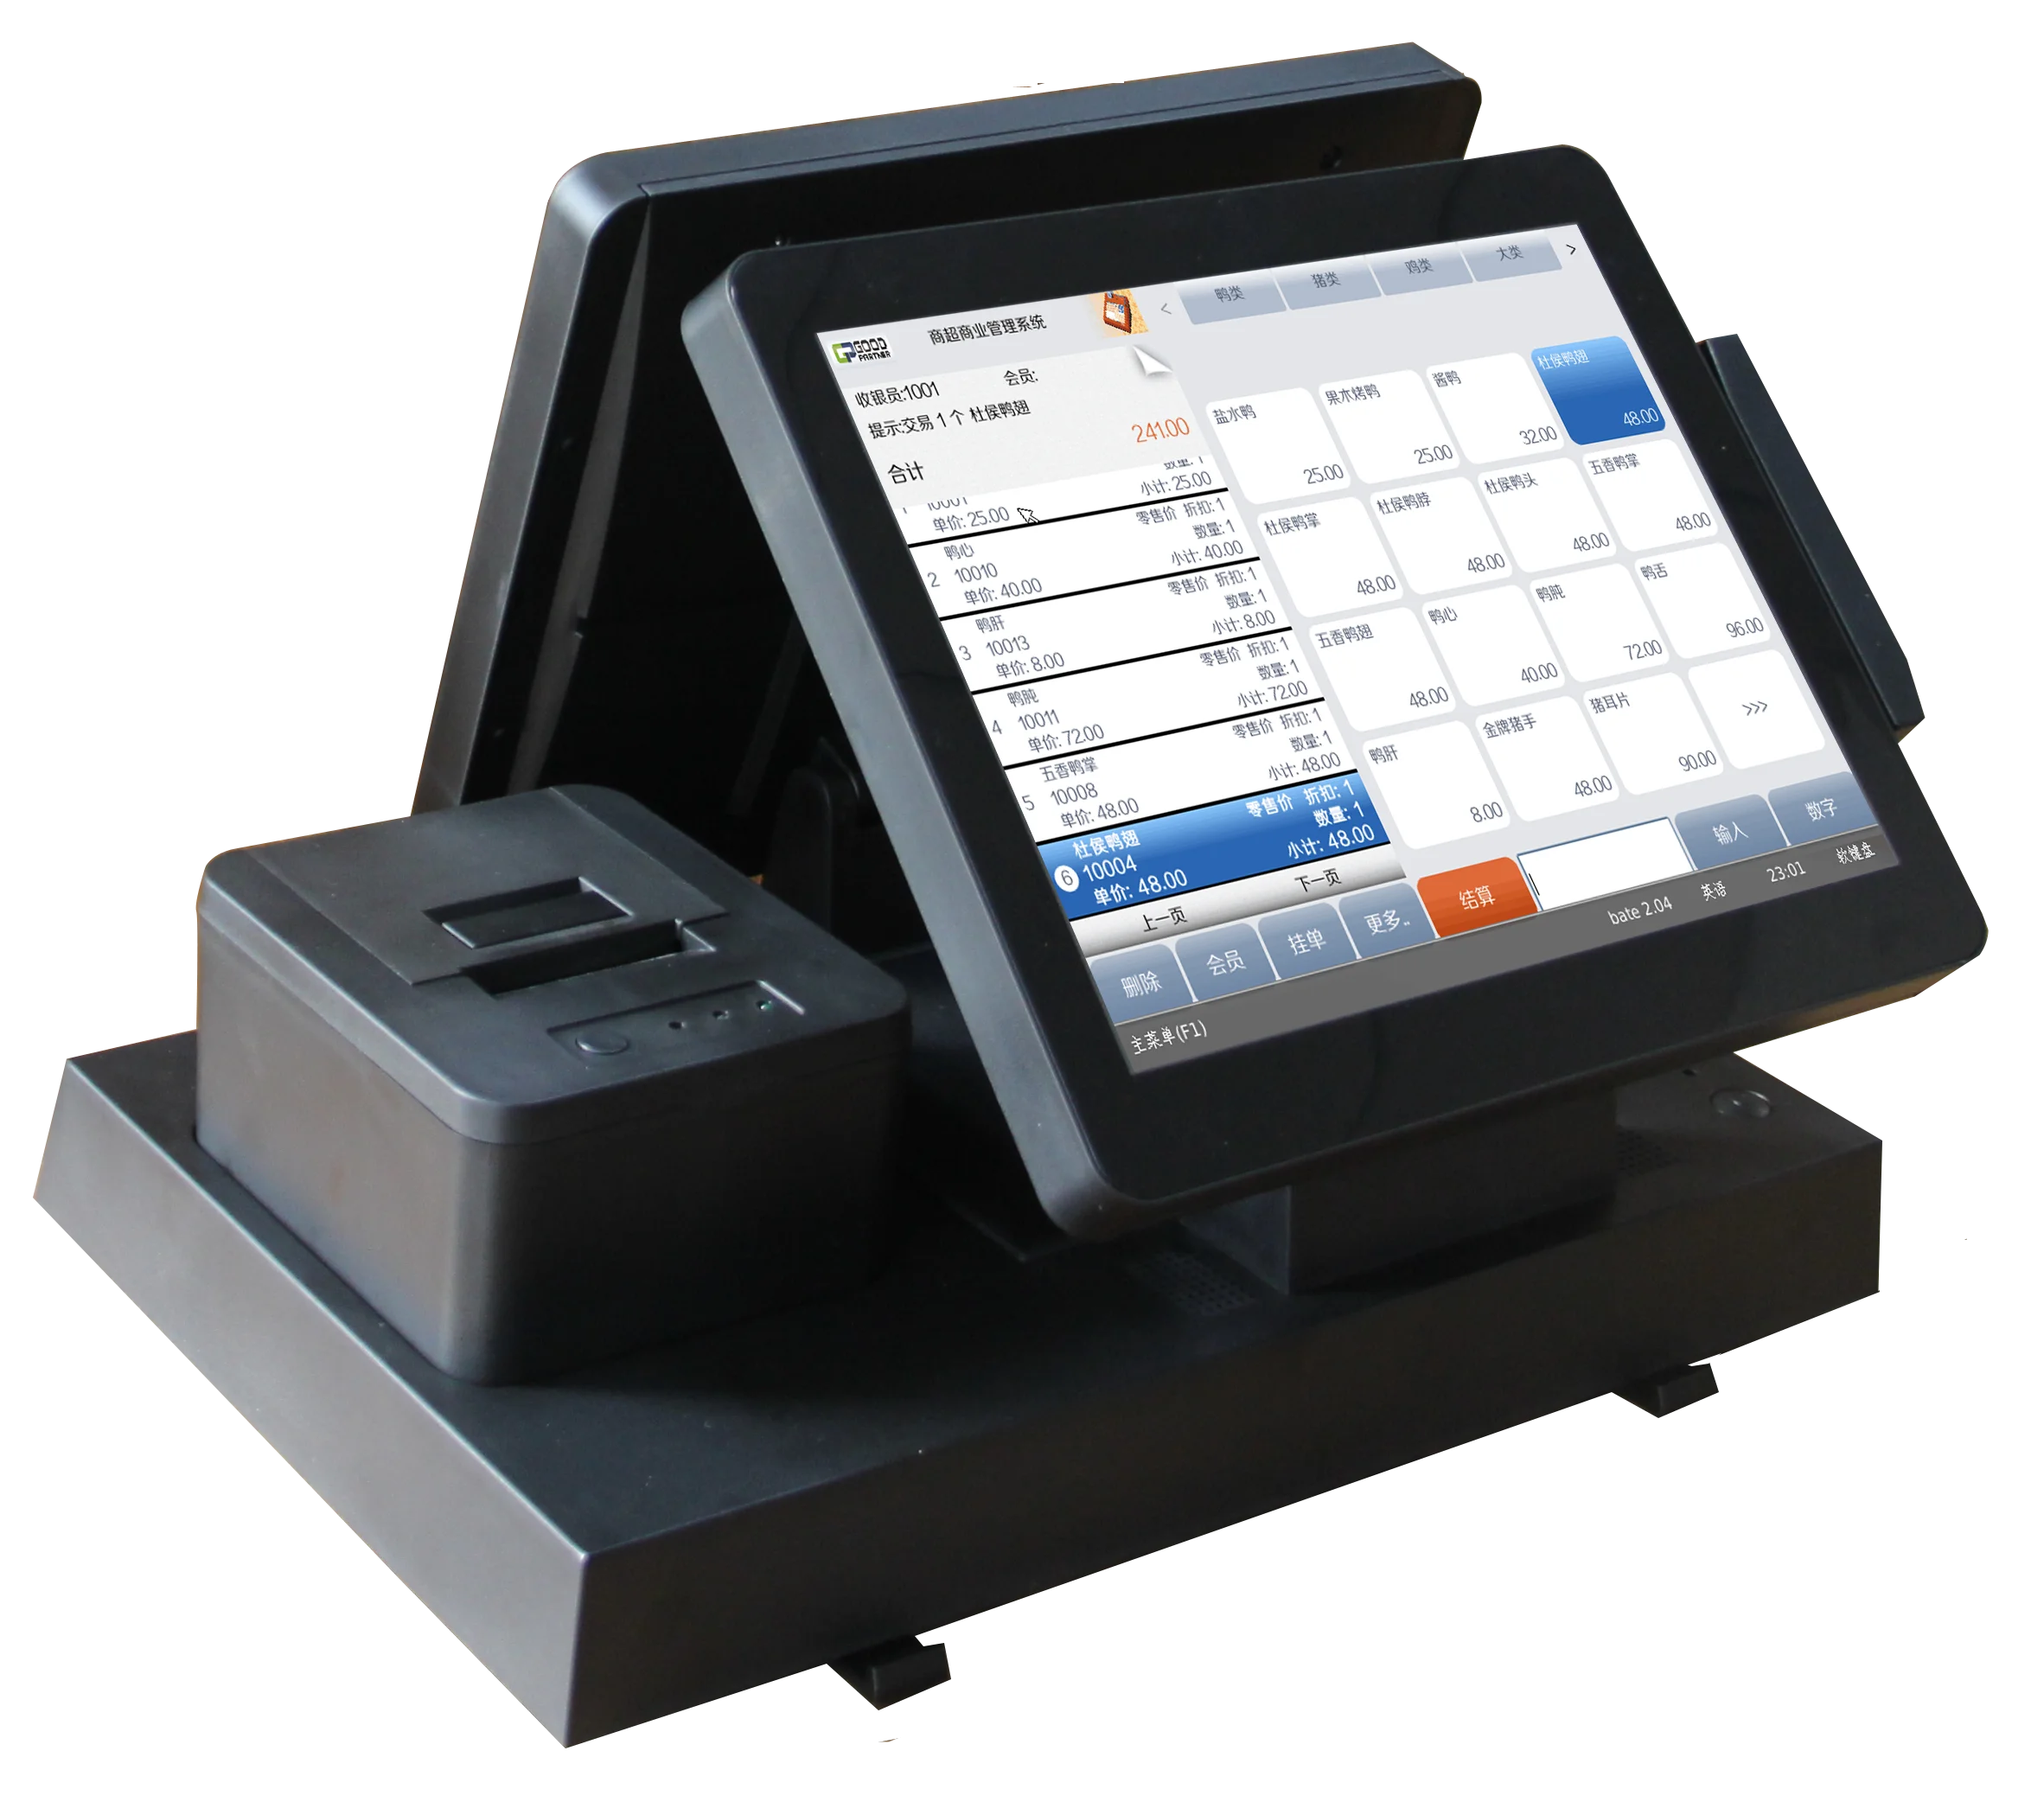 

All in One Touch Screen POS System Payment Terminal Point of Sale Machine with Built in 58mm Thermal Printer